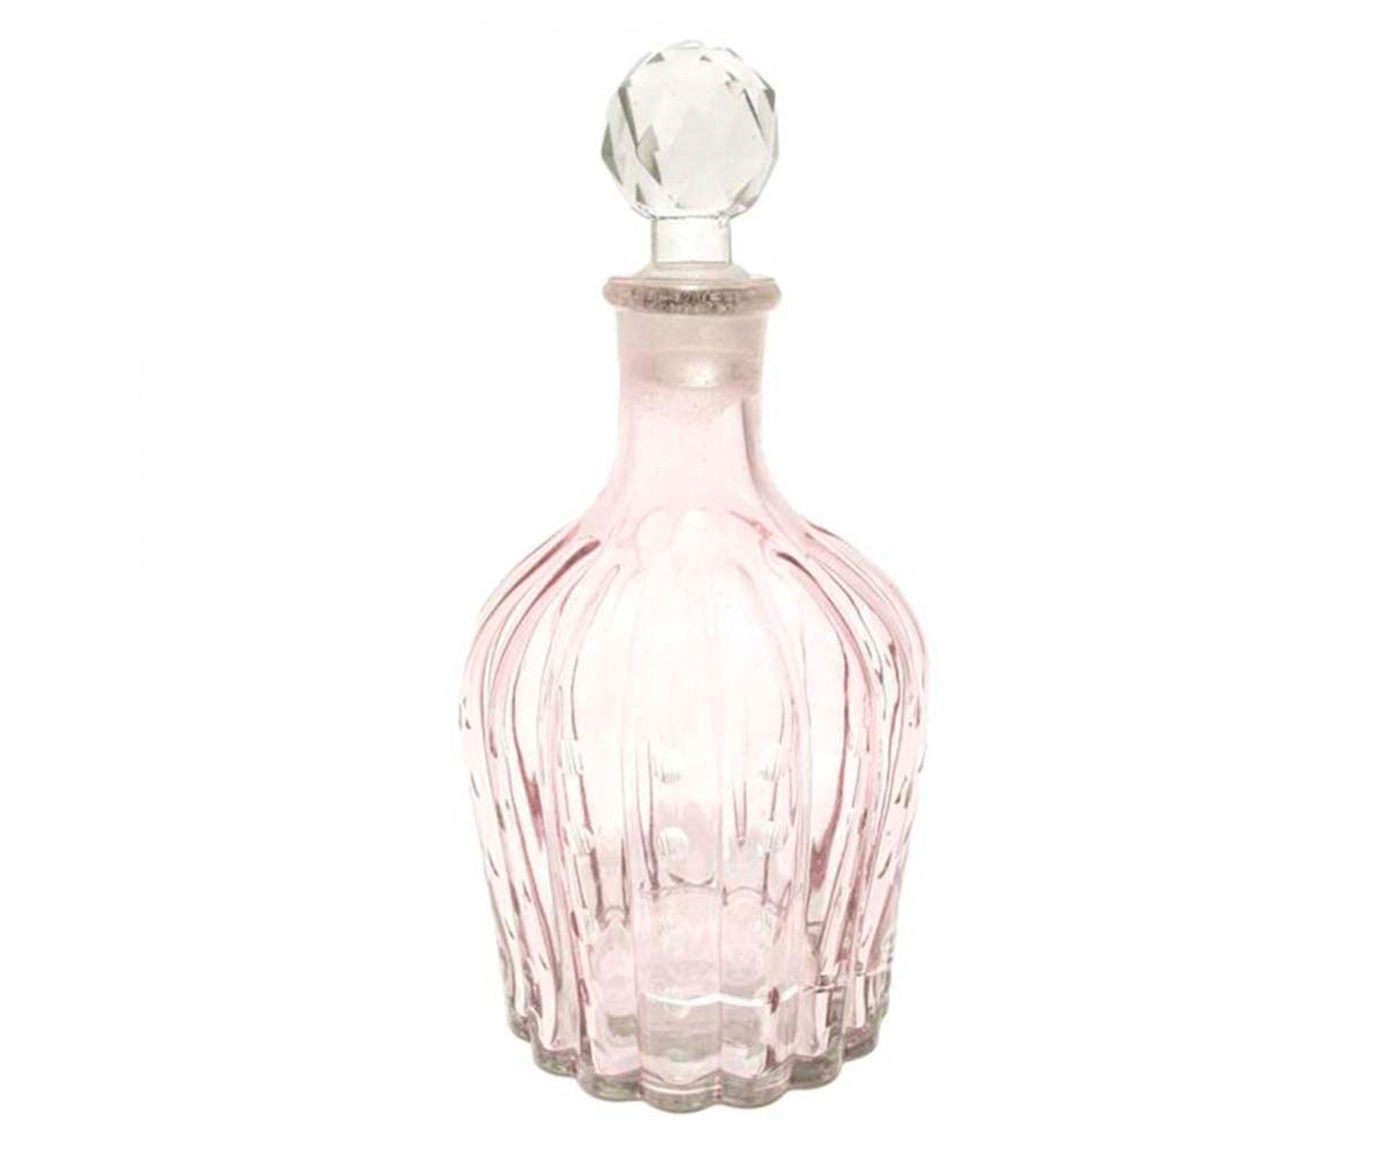 Perfumeiro pearl belle - 20 x 10 cm | Westwing.com.br